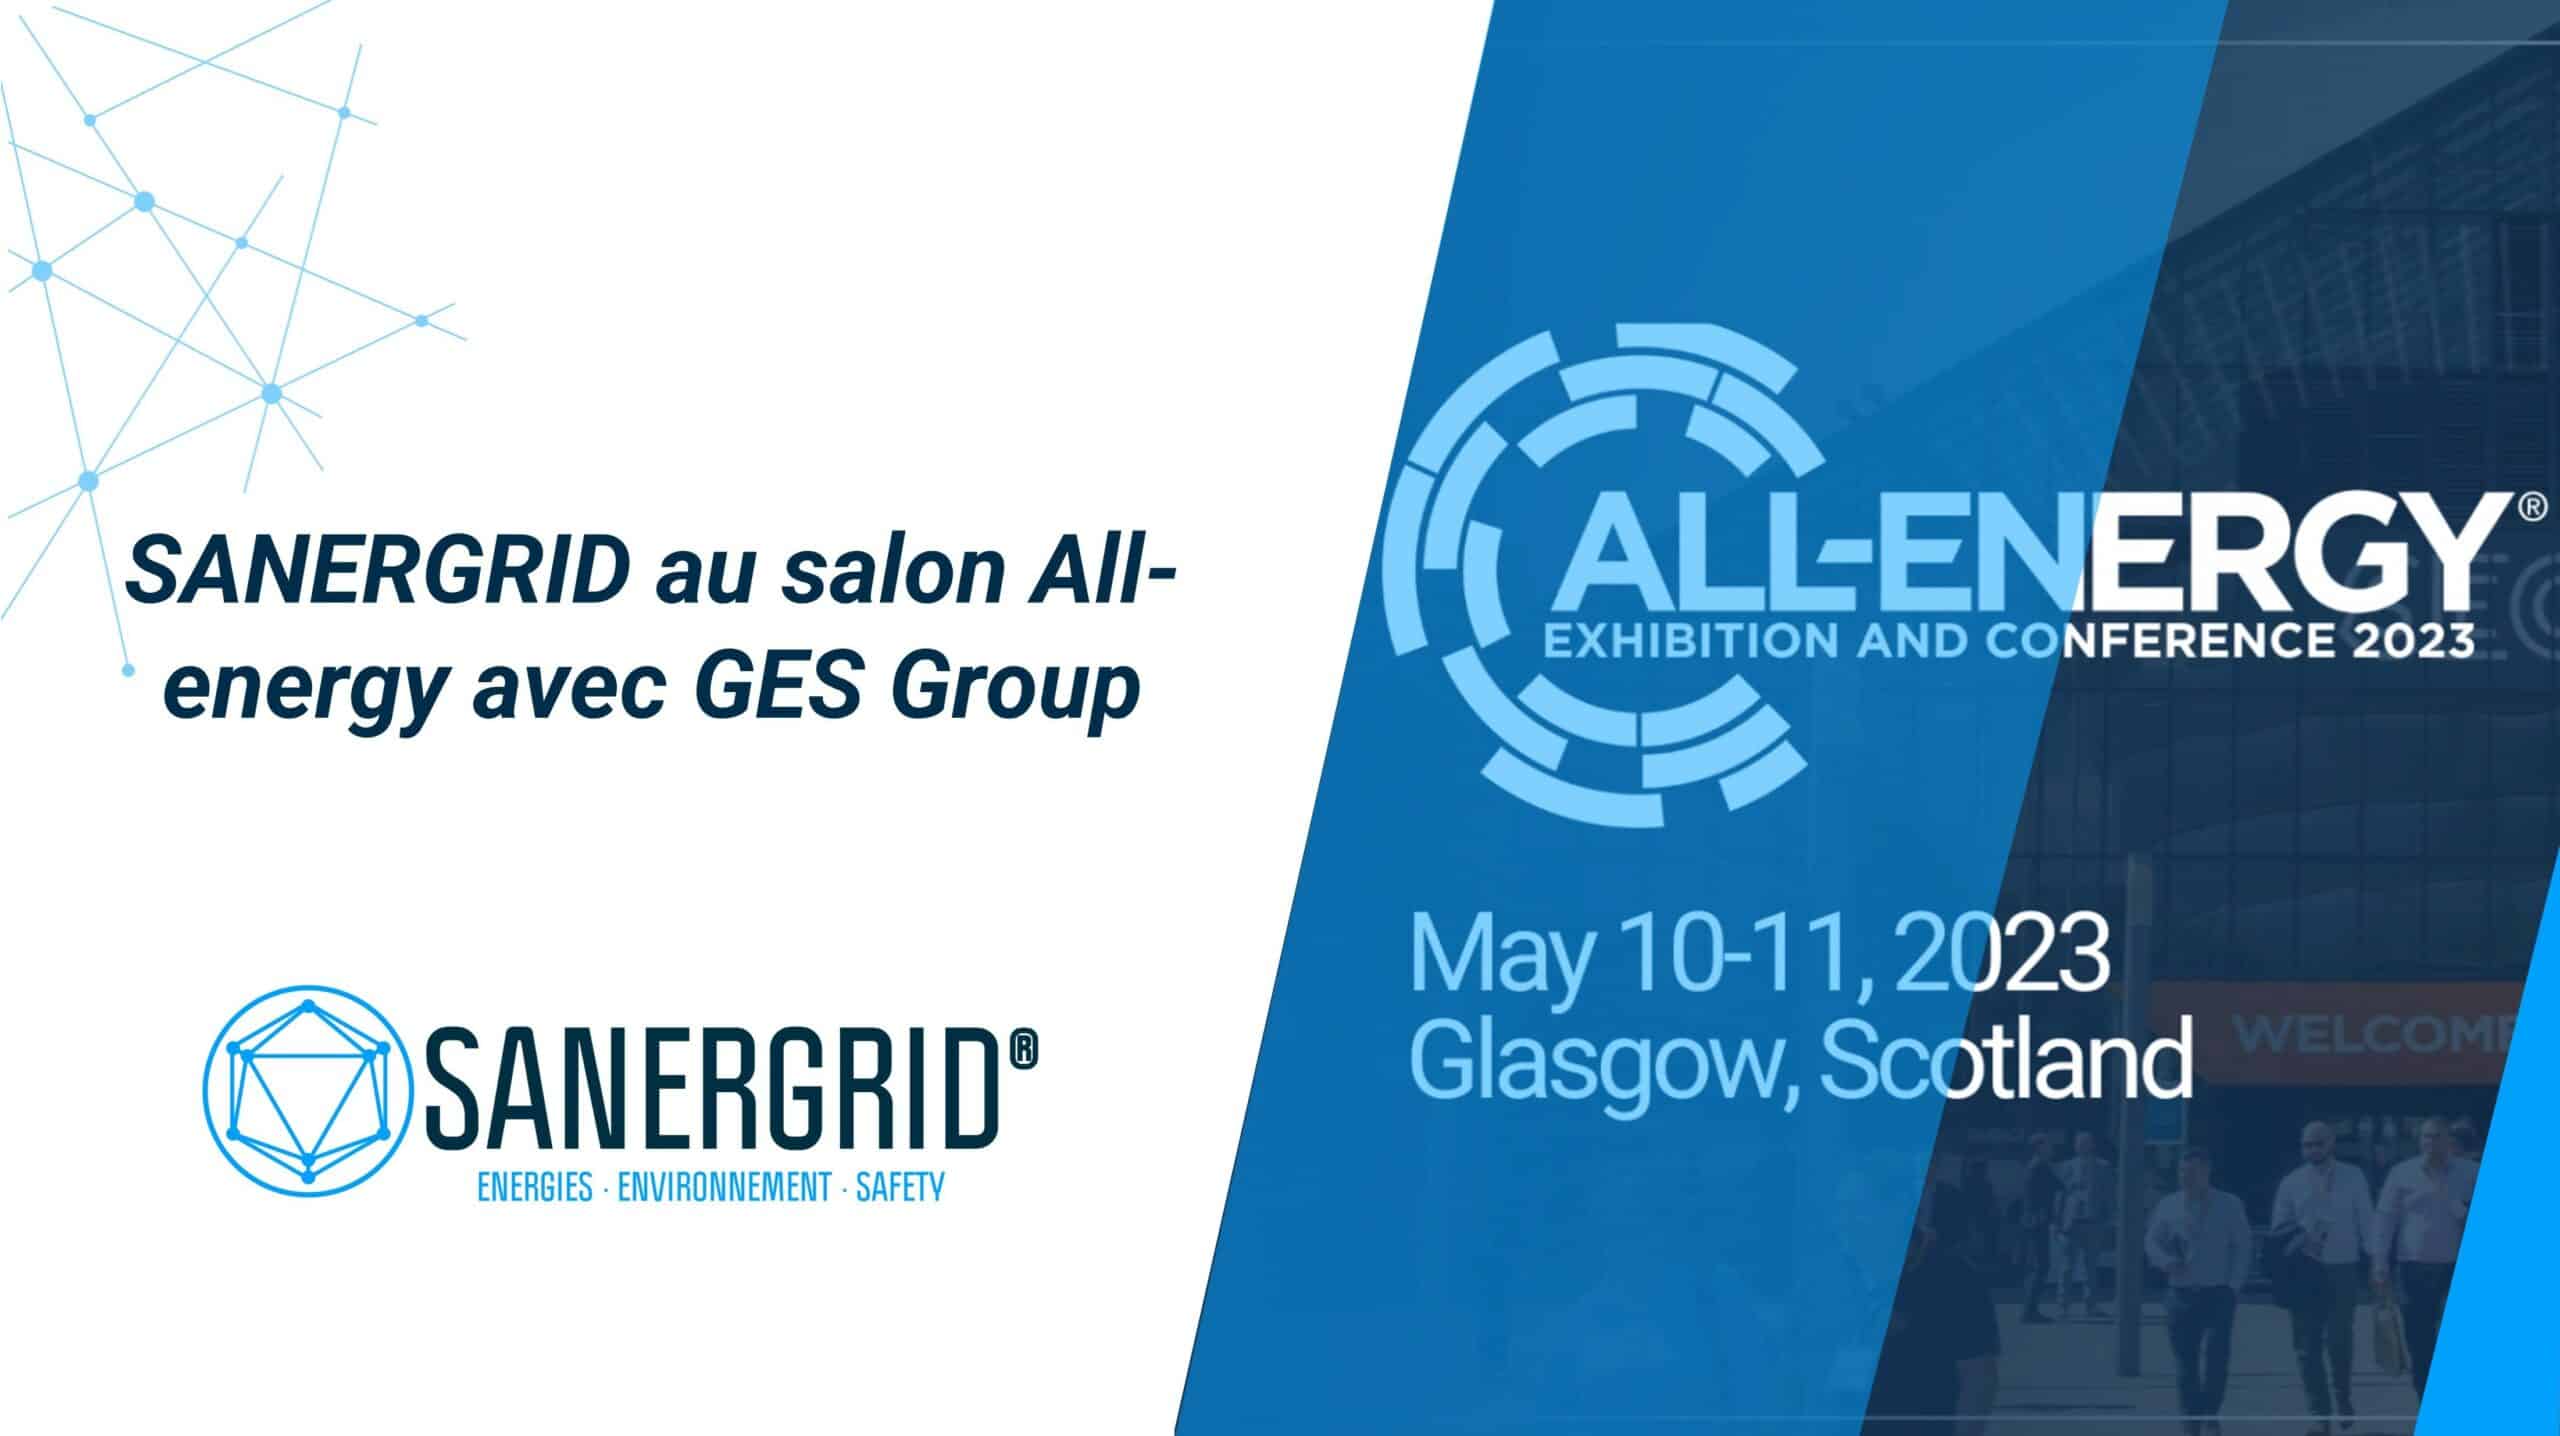 SANERGRID and SYNERDIS at the All-Energy Exhibition and Conference in May 2023 with GES Group